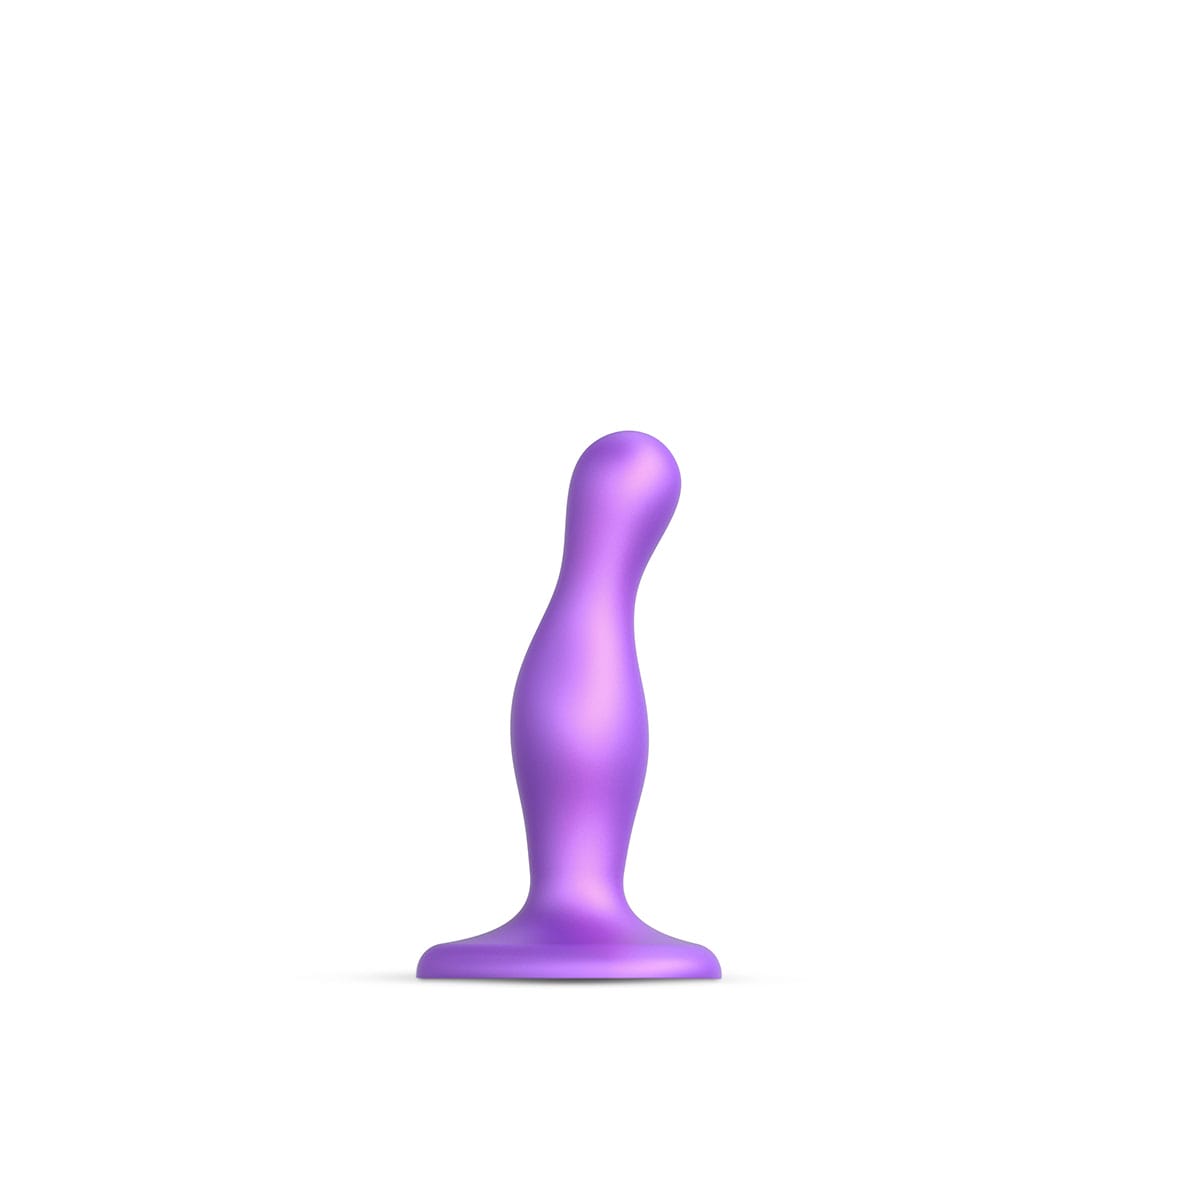 Buy Strap On Me Curvy Plug Dil Metallic Purple   Small  long and 1.47 thick dildo made by Strap-On-Me.